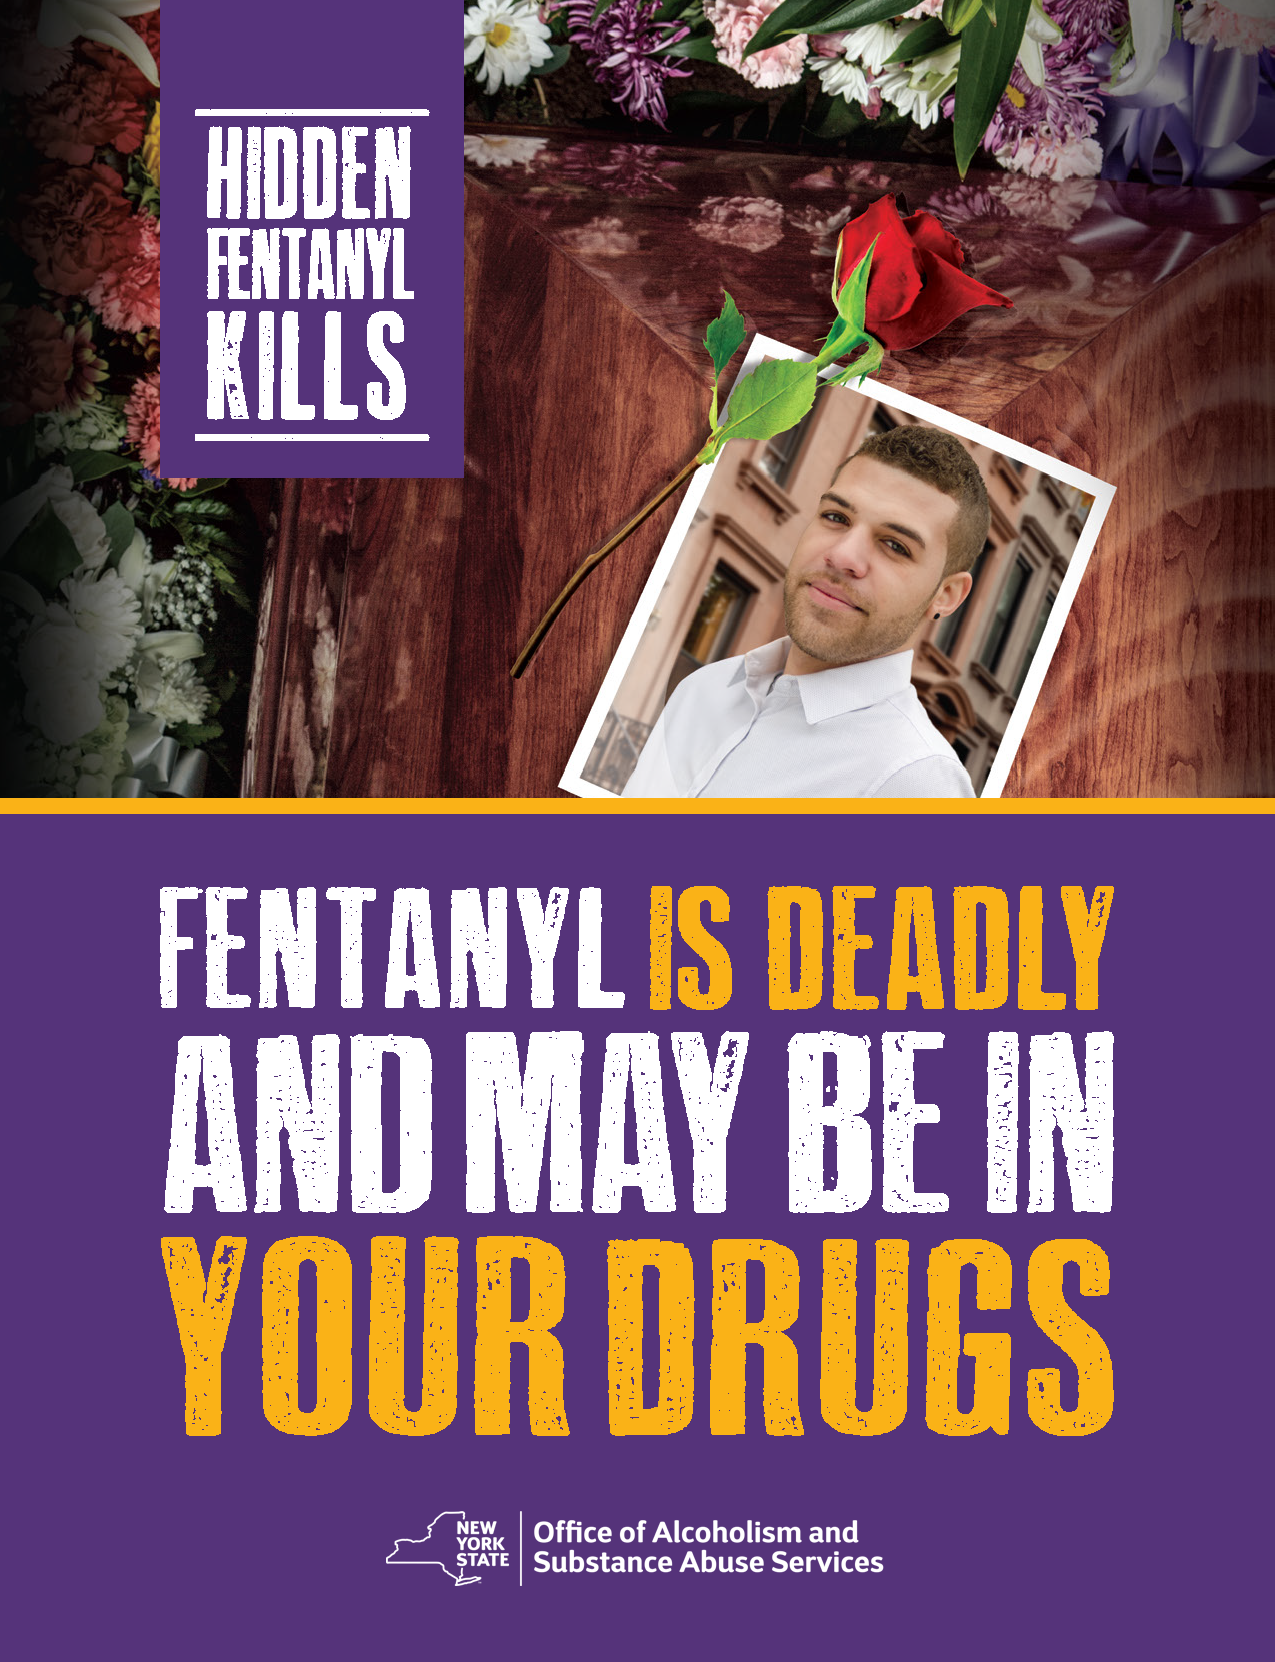 Image showing coffin with picture of man who overdosed from fentanyl